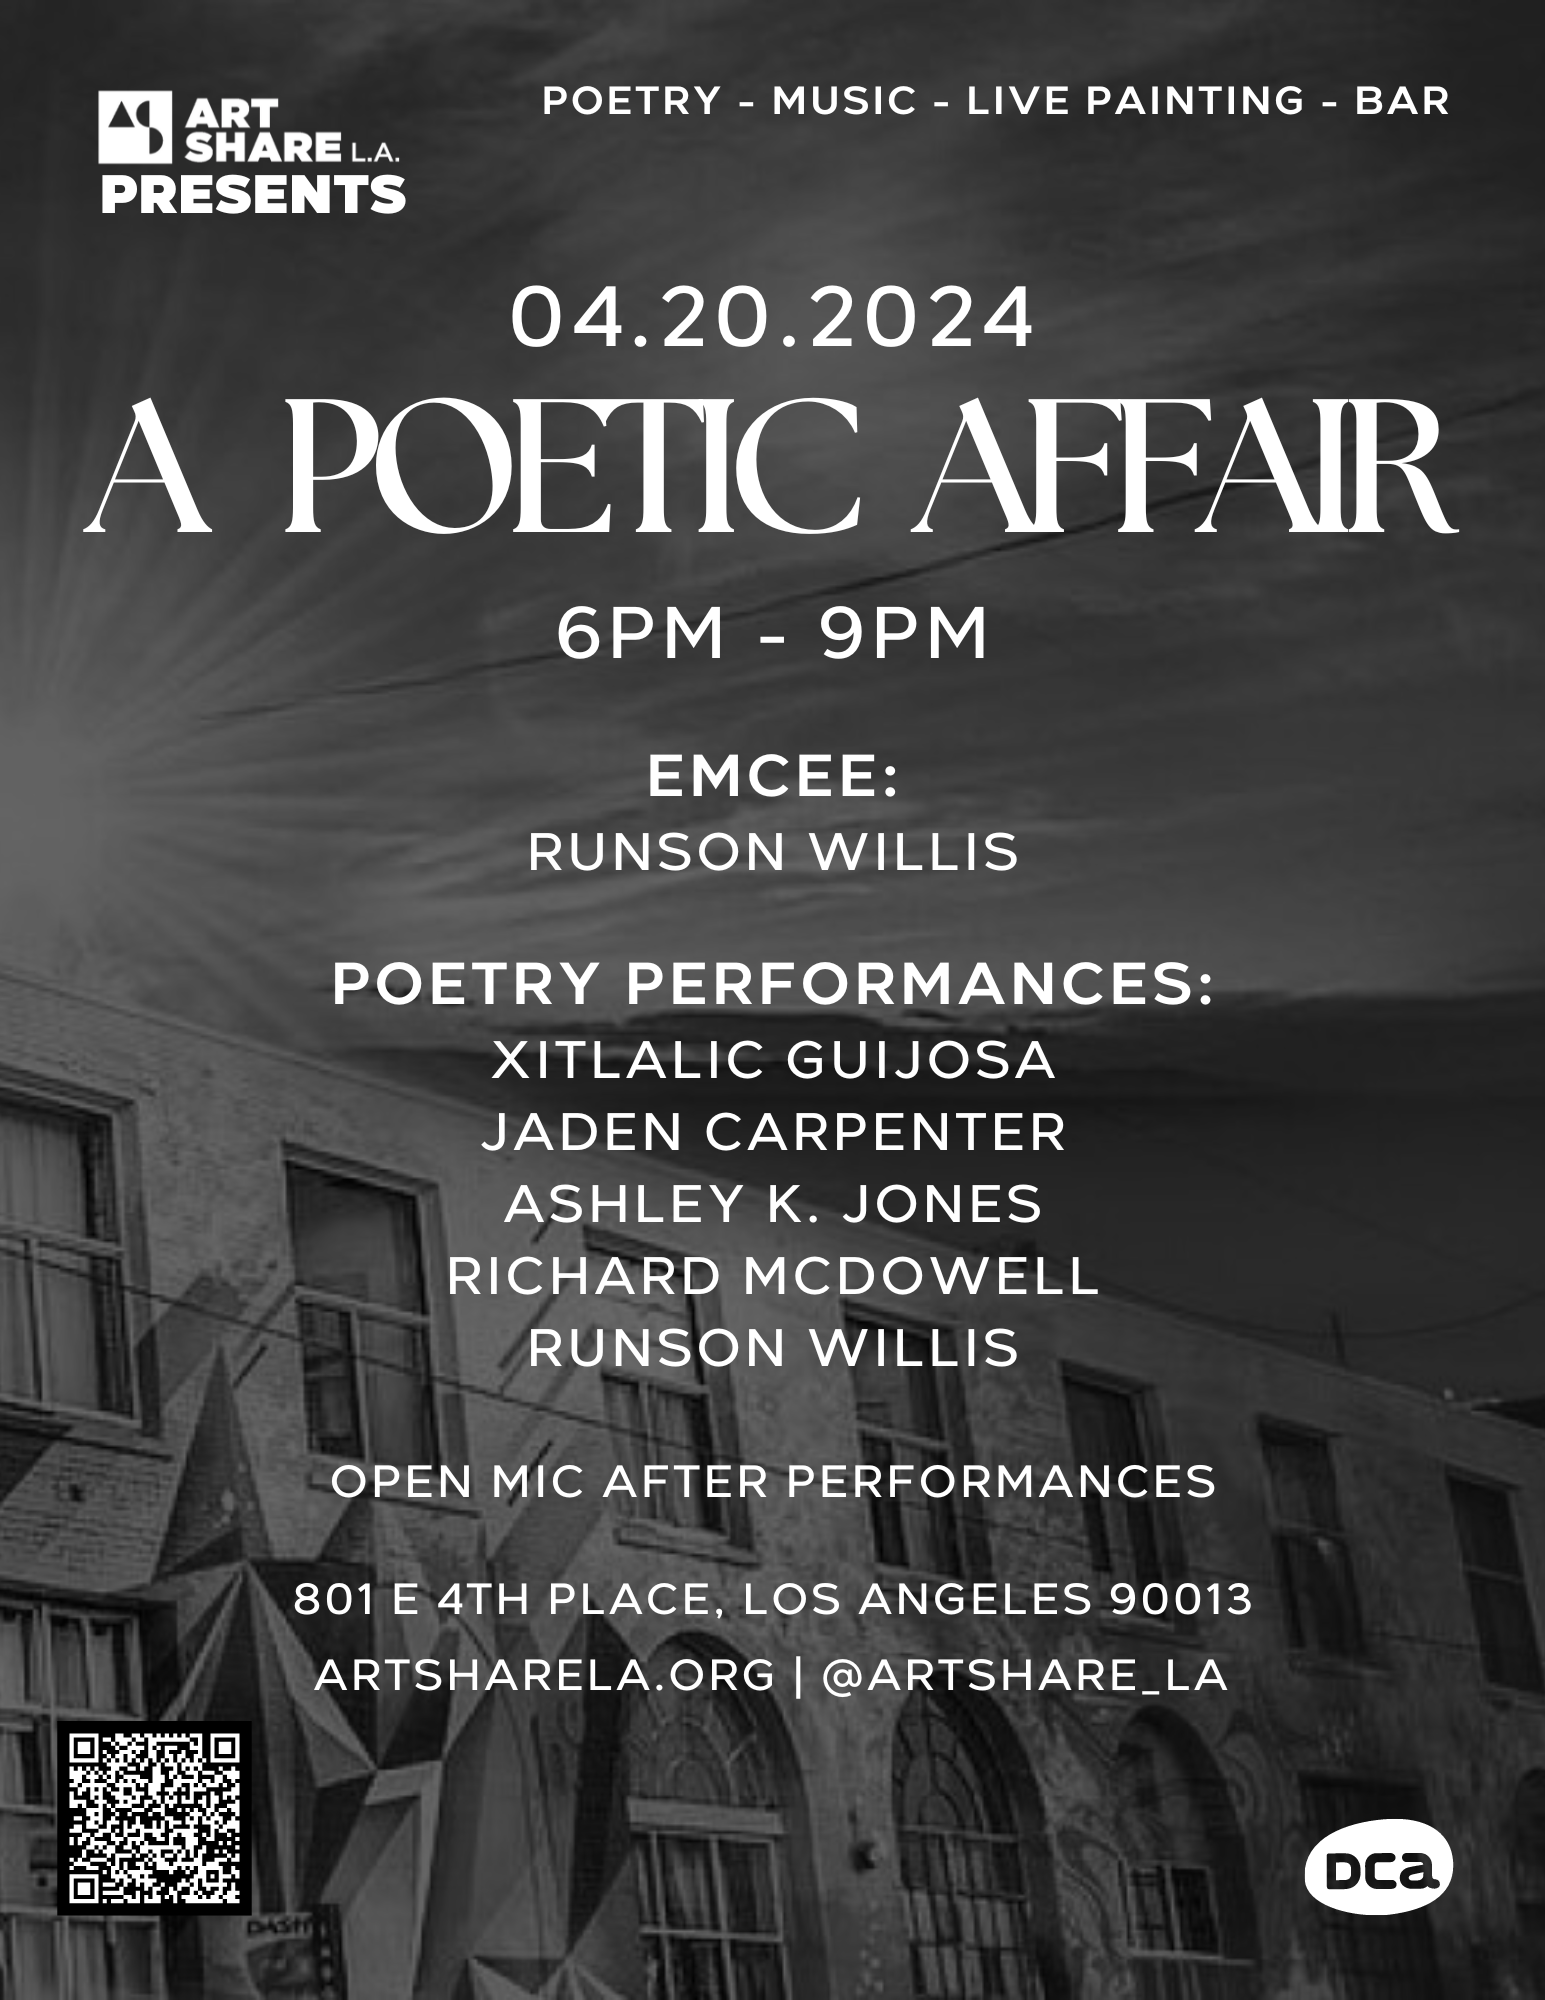 The image is a black and white photo of a building with a sign on it. The sign provides details about an event called "A Poetic Affair" presented by Share L.A. on April 20, 2024, featuring poetry performances, live painting, music, and a bar. Emcee for the event is Runson Willis, and there will be an open mic session after the performances. The event will take place at 801 E 4th Place, Los Angeles 90013. For more information, visit artsharela.org or check @artshare_la on social media.